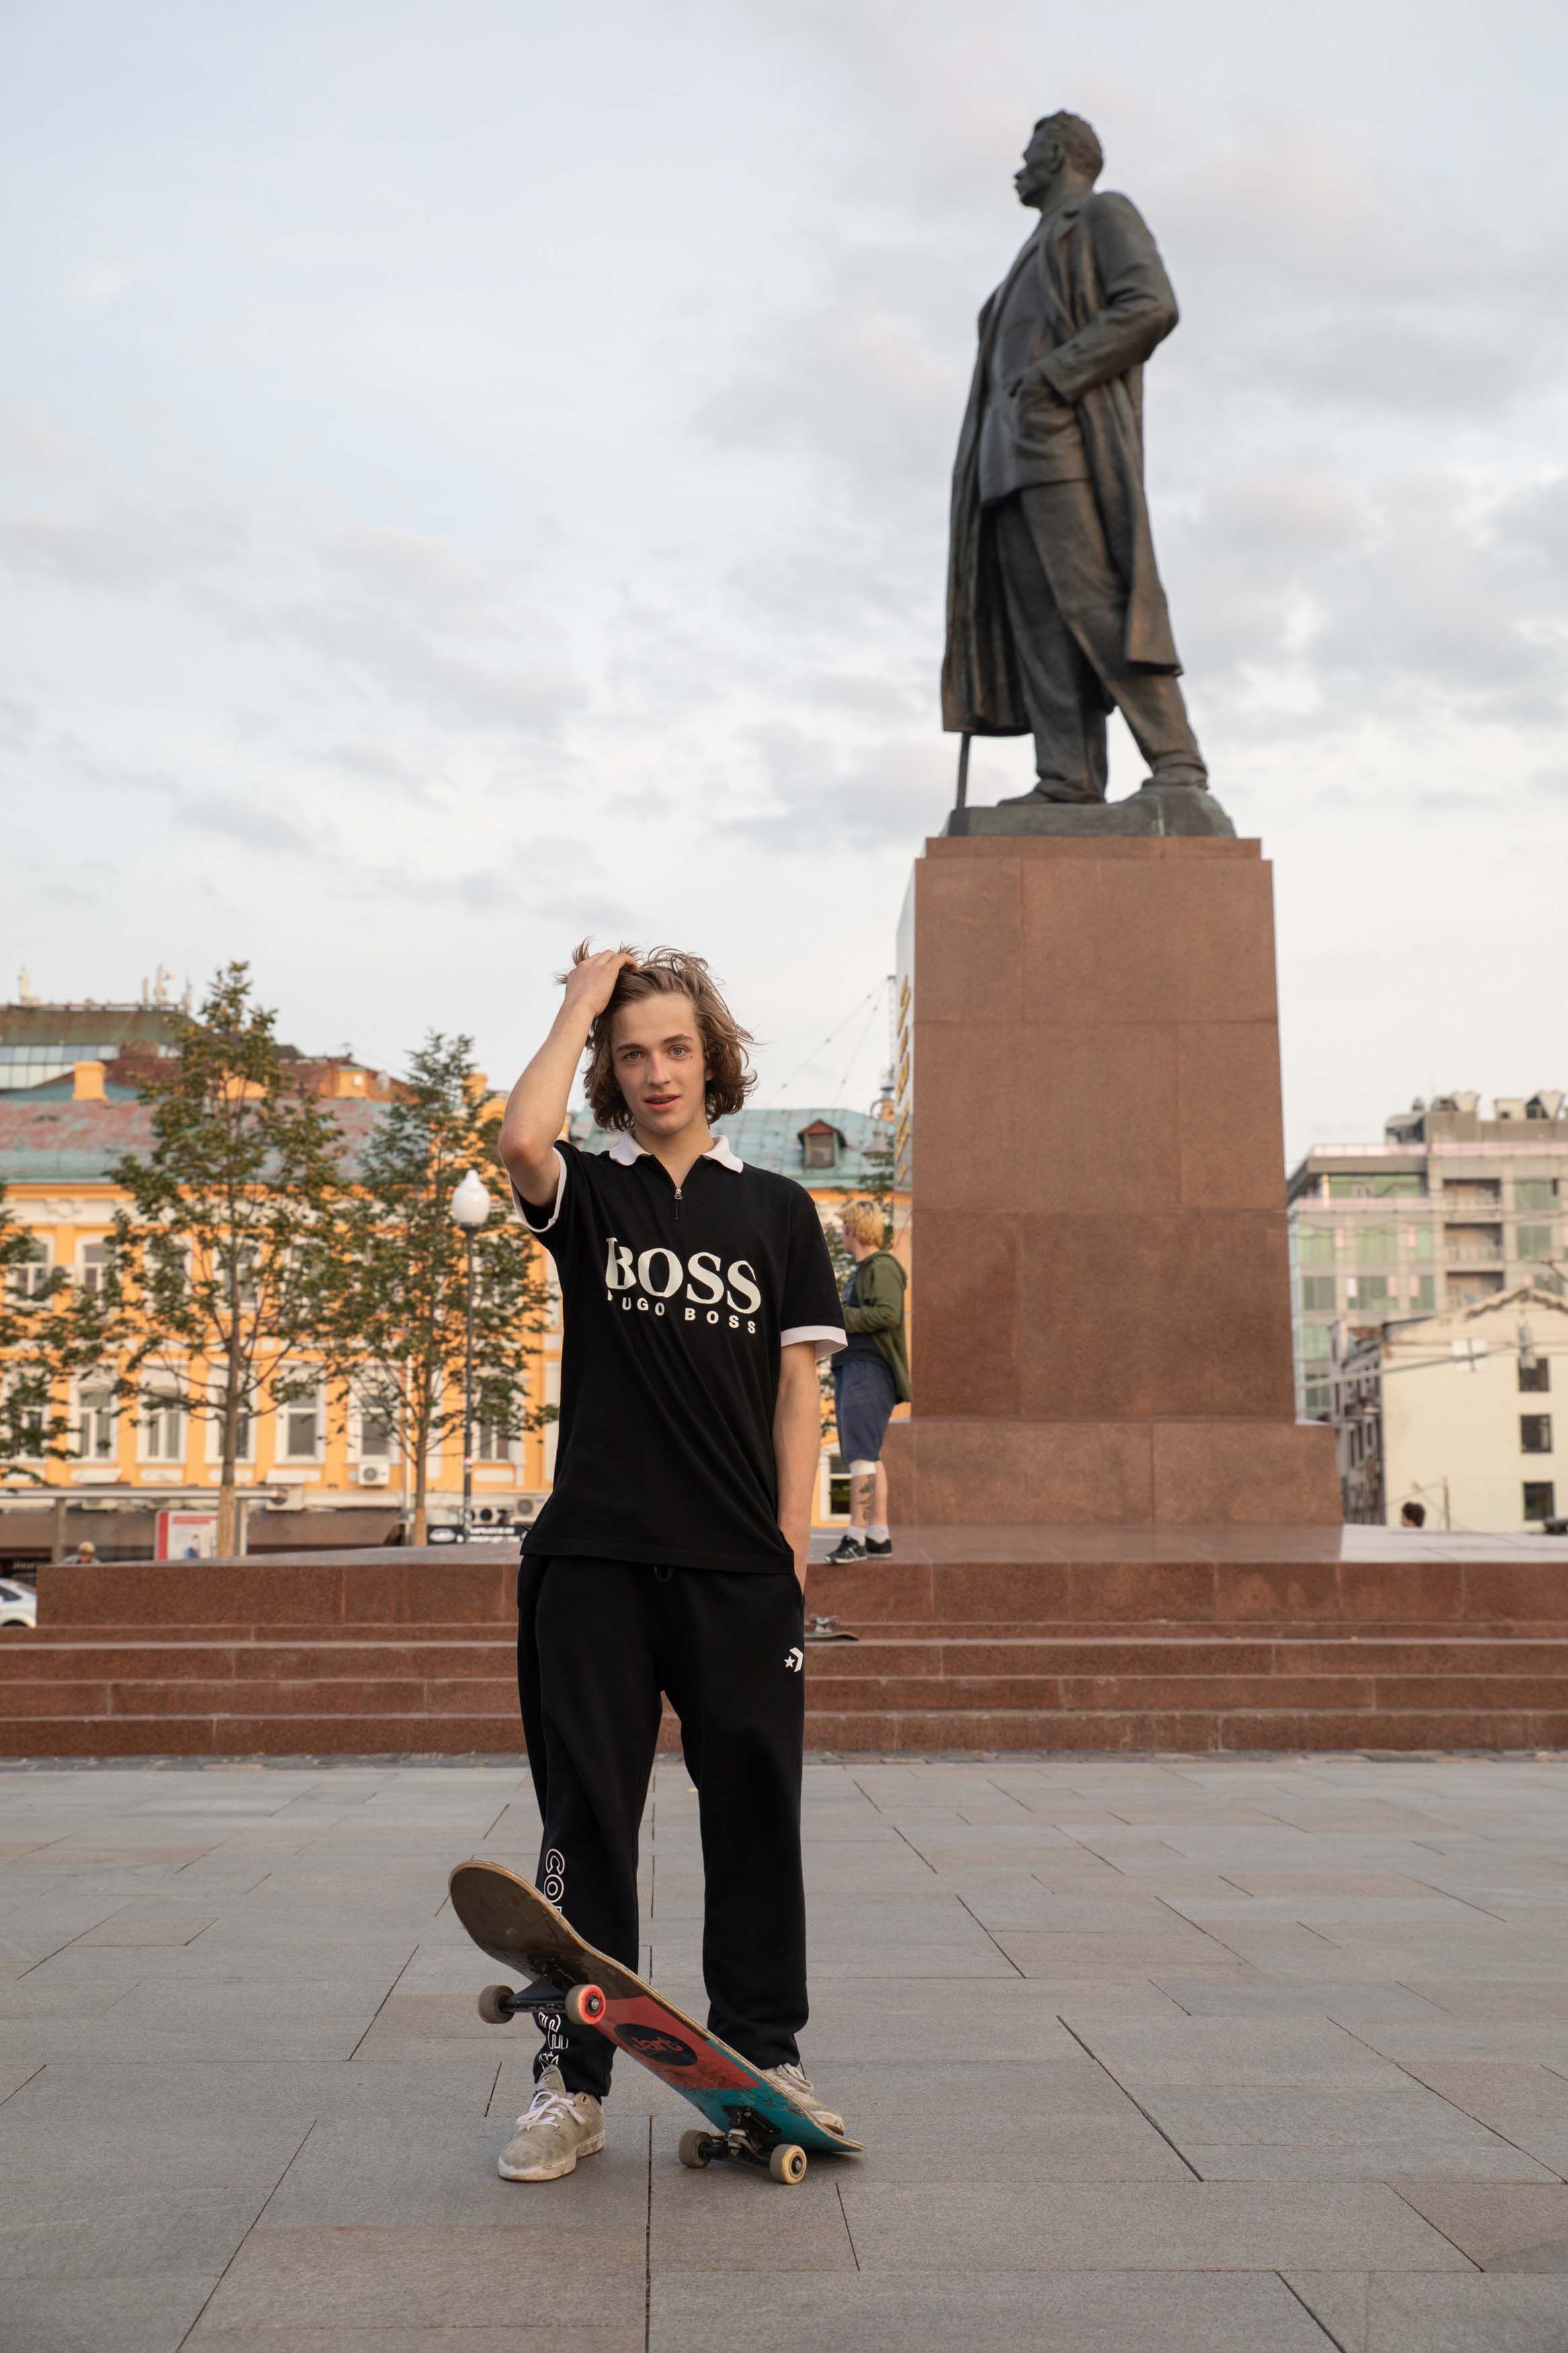 How Russia's Skate Culture Found Its Own Unique Sense of Style